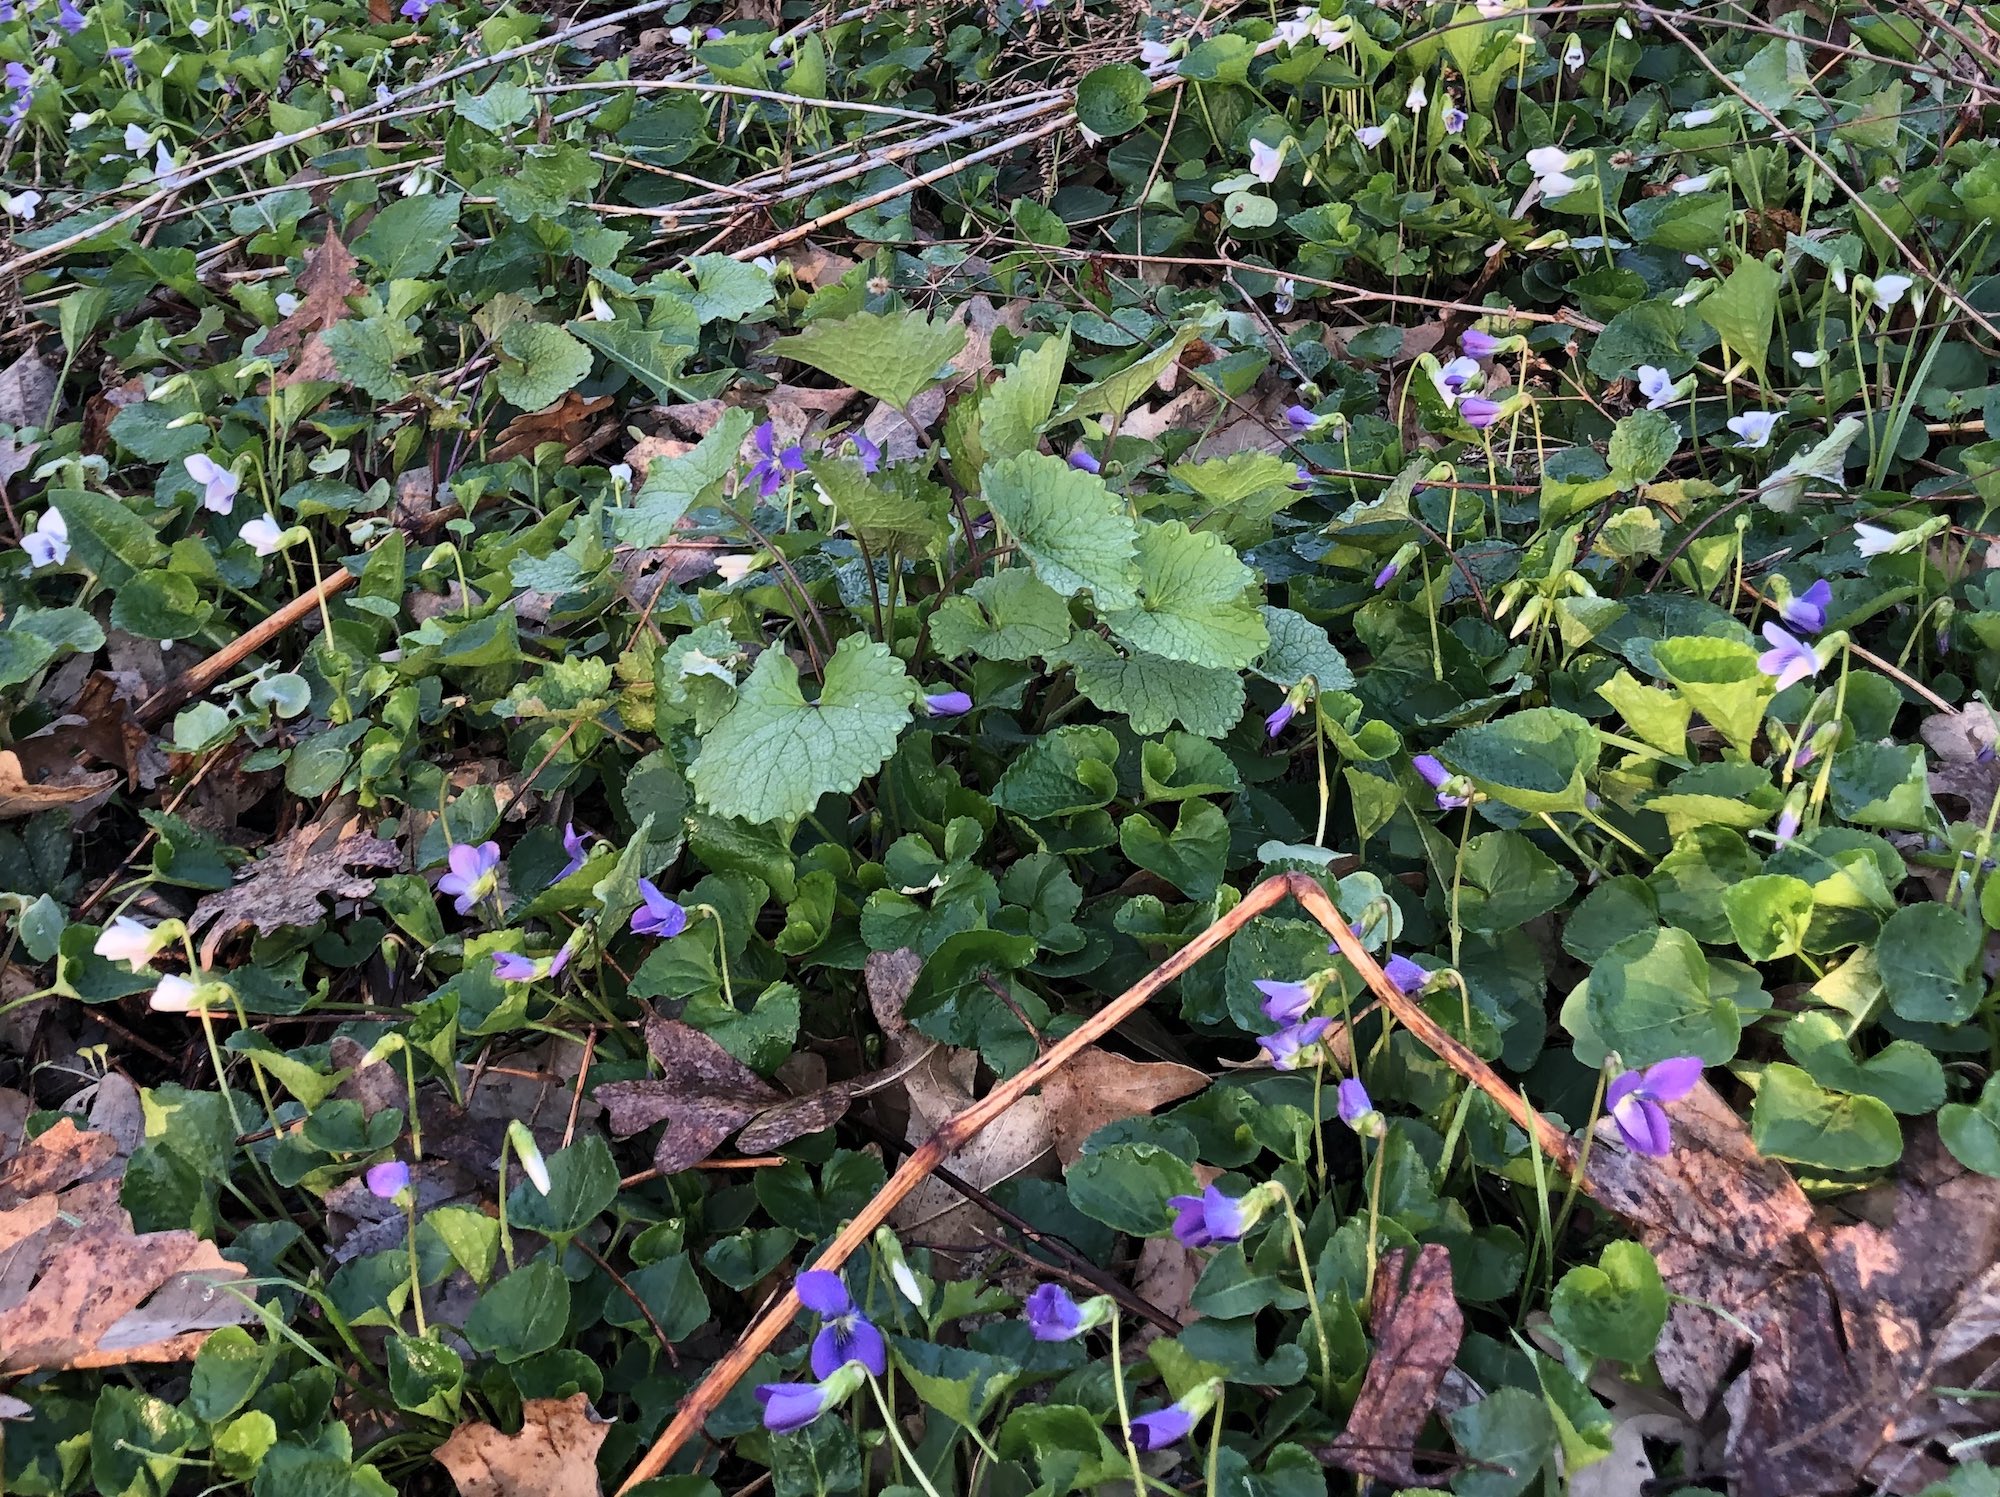 Wood Violets near Council Ring, the Oak Savanna and the Duck Pond on April 24, 2019.